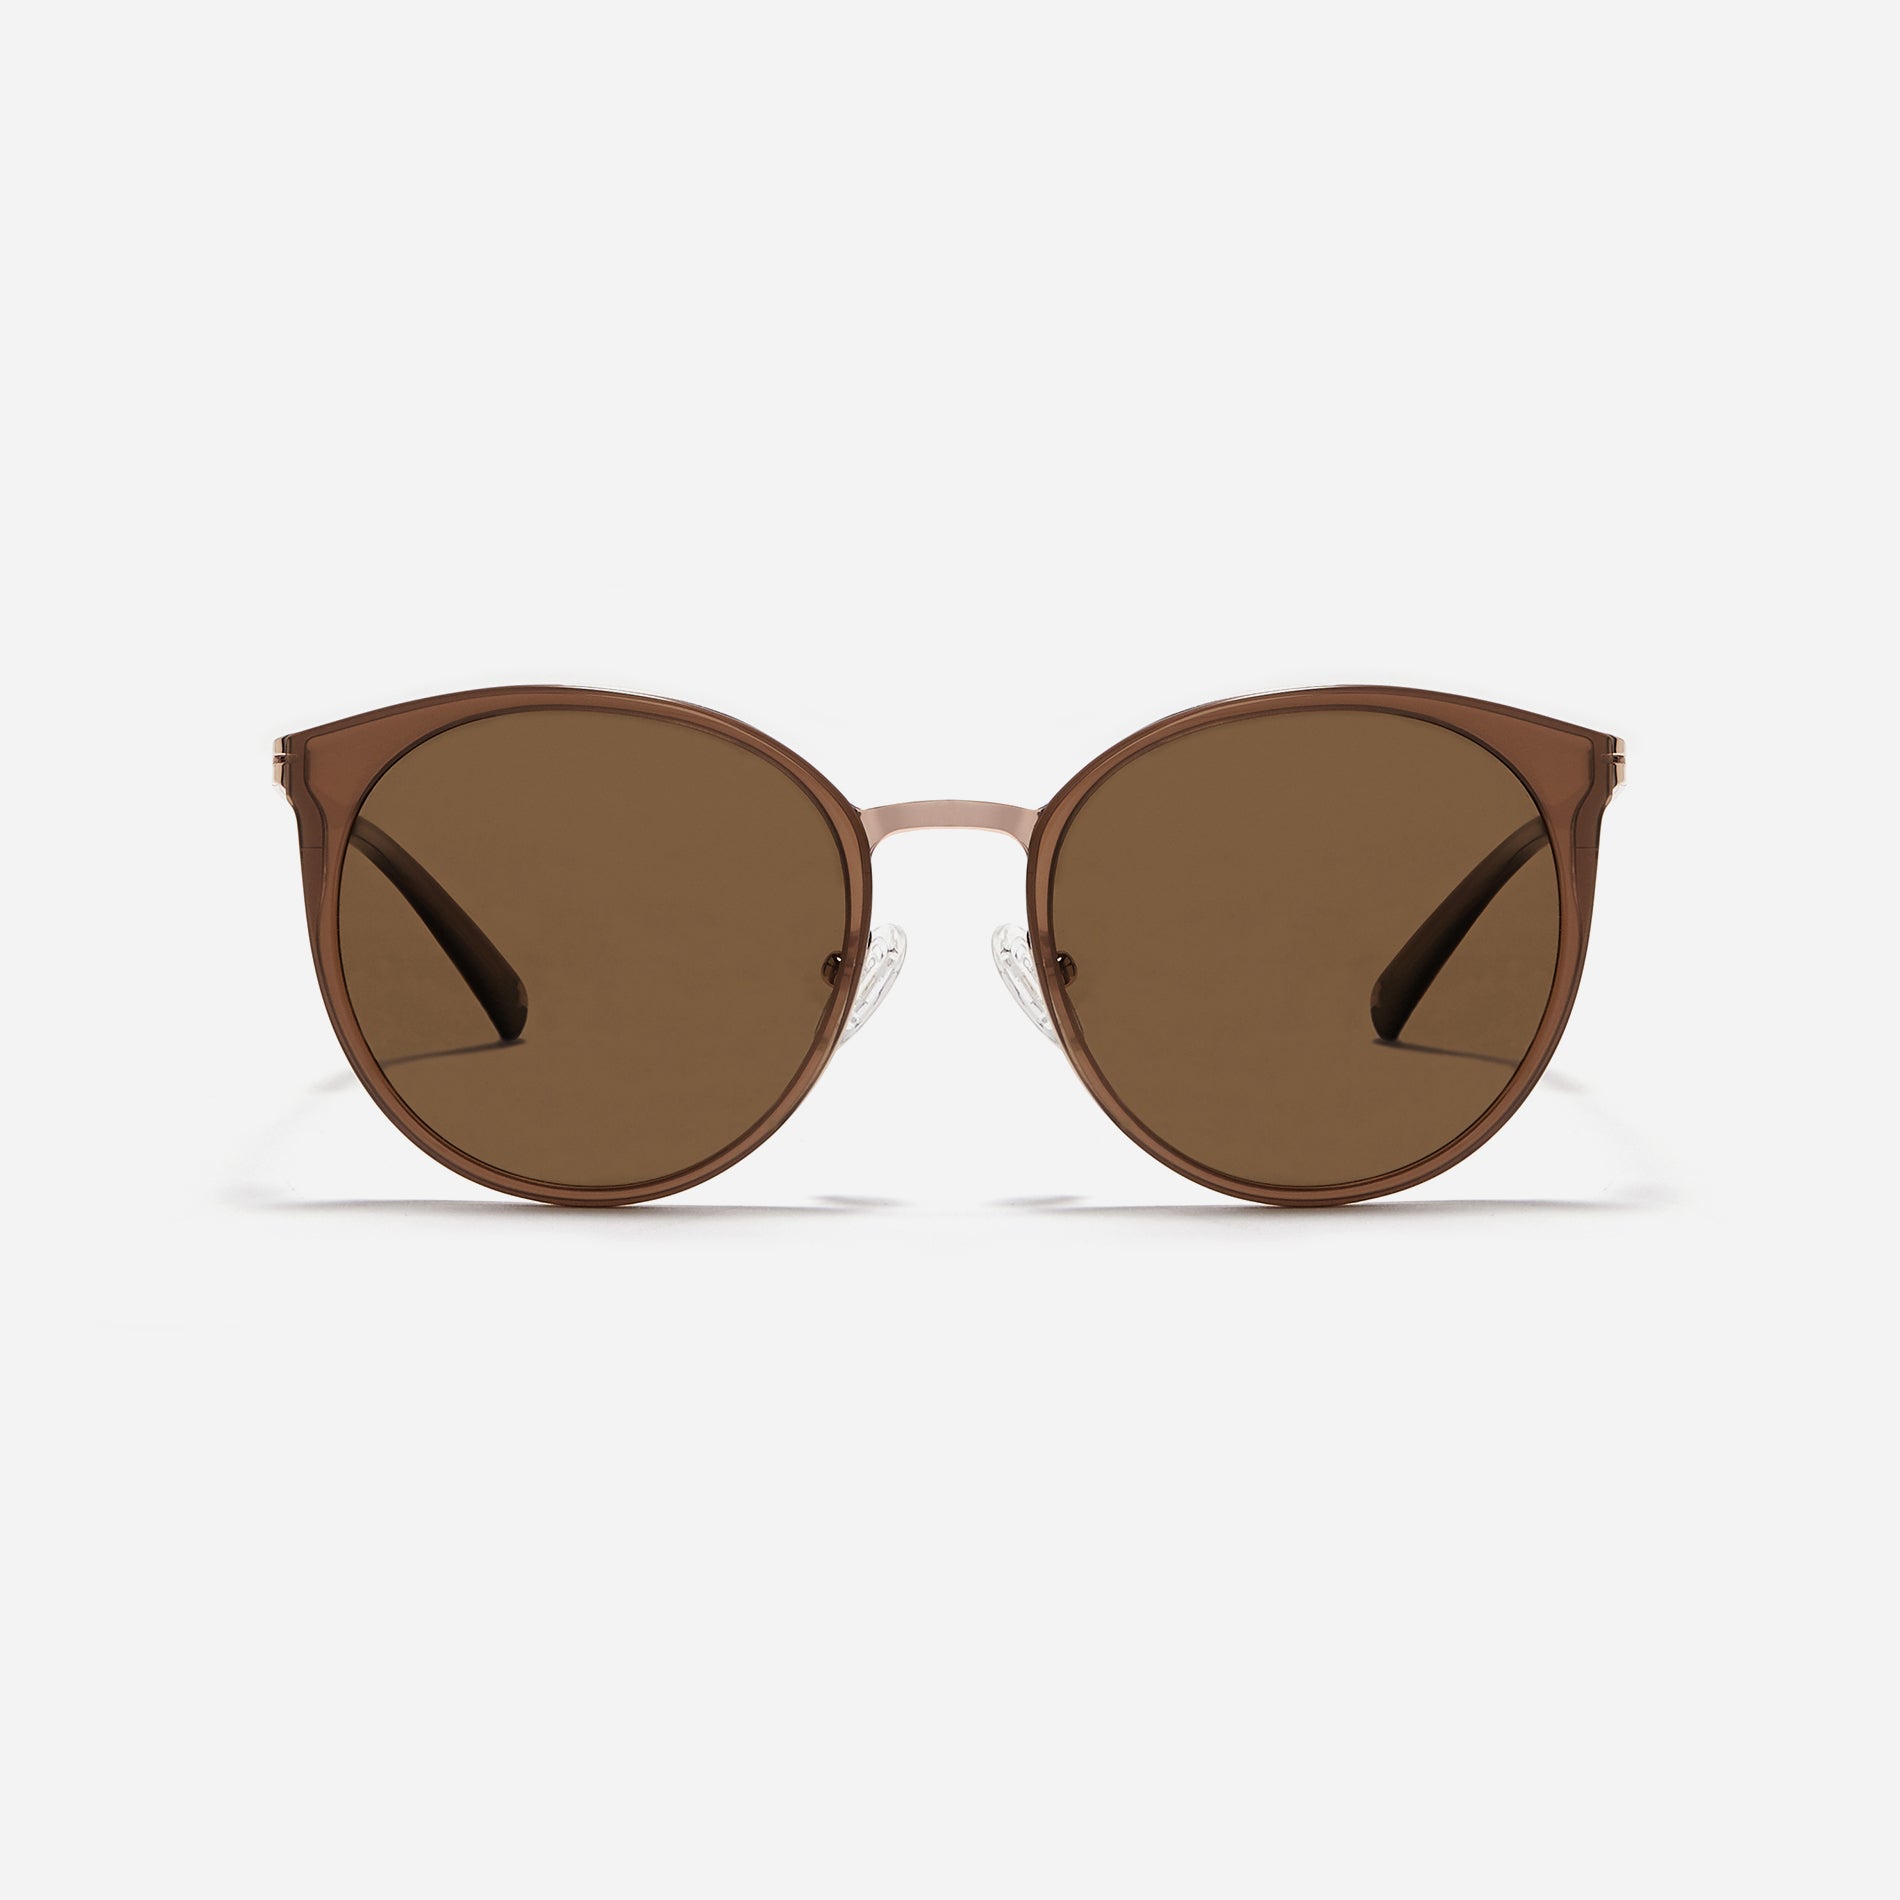 Round-shaped combination polarized sunglasses that feature delicate acetate rims and metal structural details.